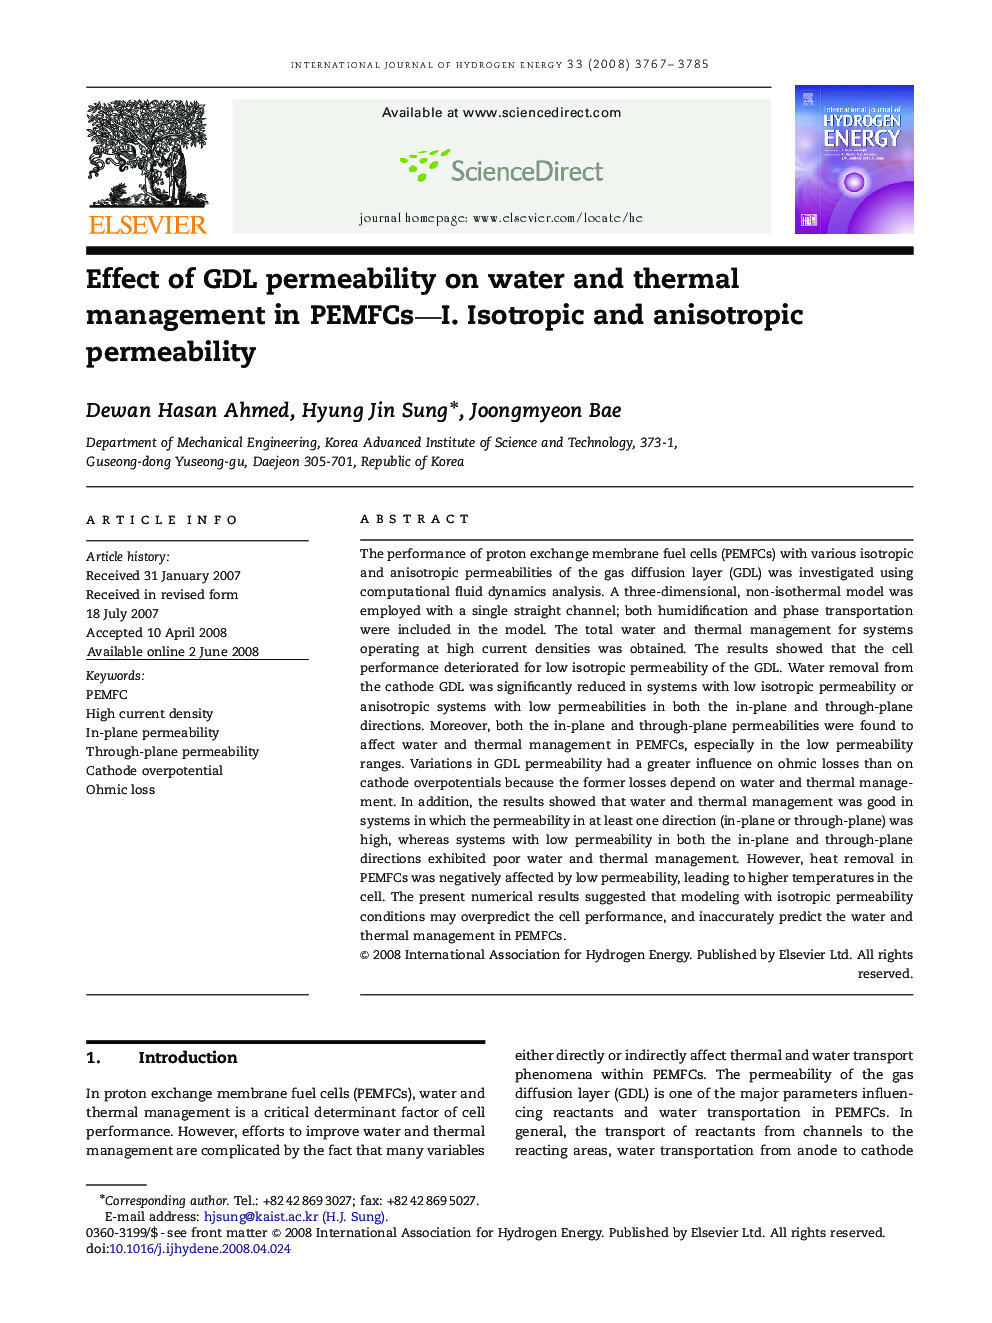 Effect of GDL permeability on water and thermal management in PEMFCs—I. Isotropic and anisotropic permeability